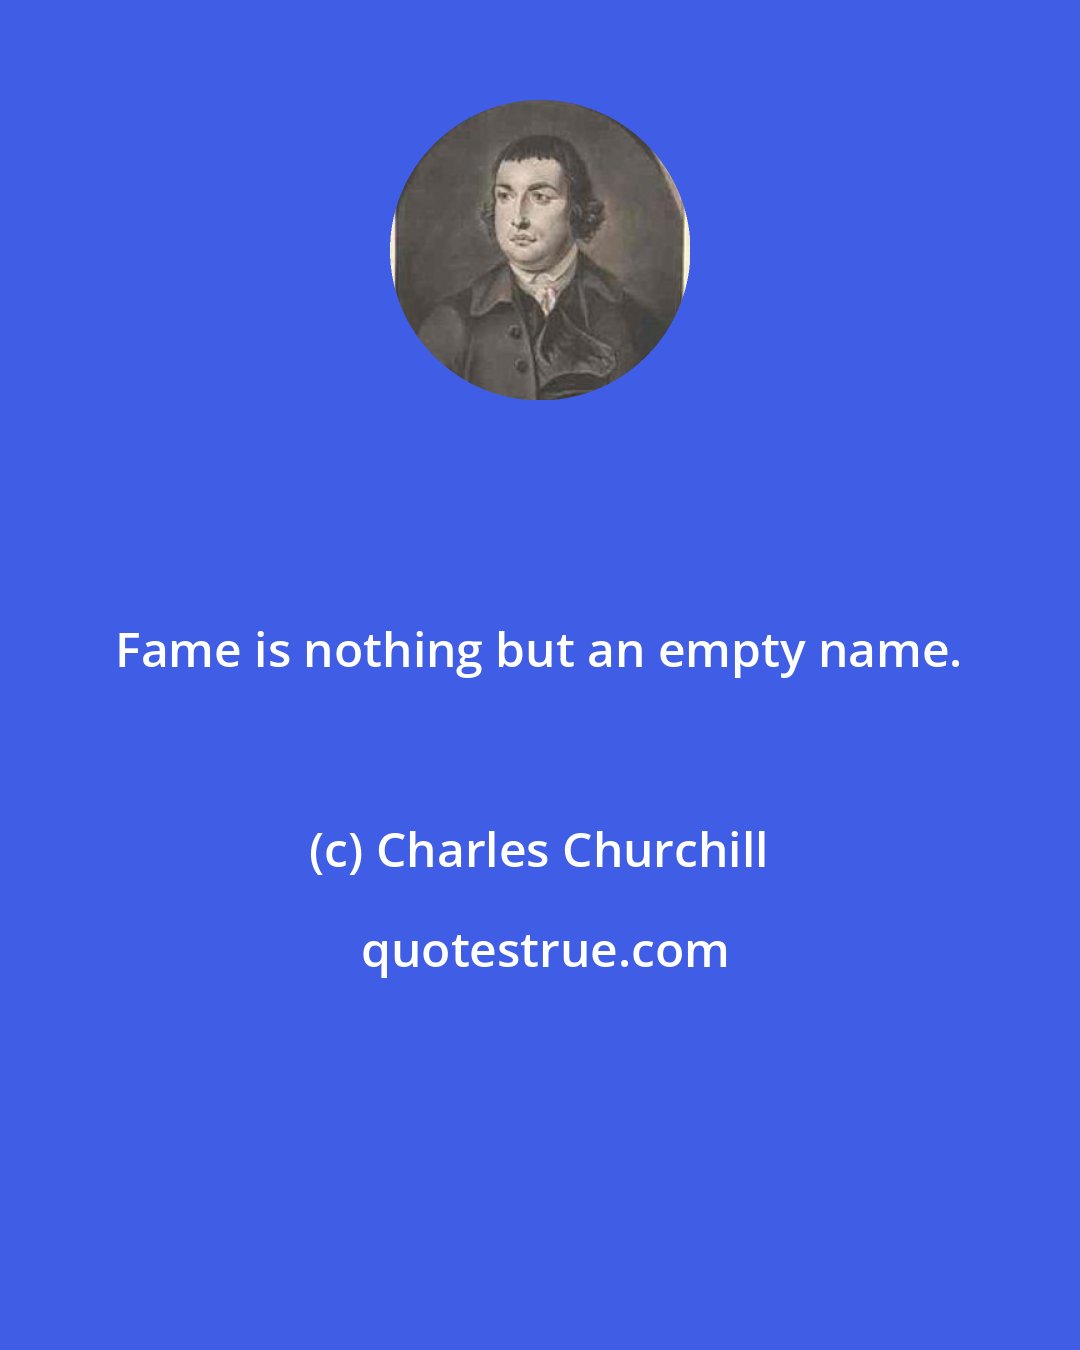 Charles Churchill: Fame is nothing but an empty name.